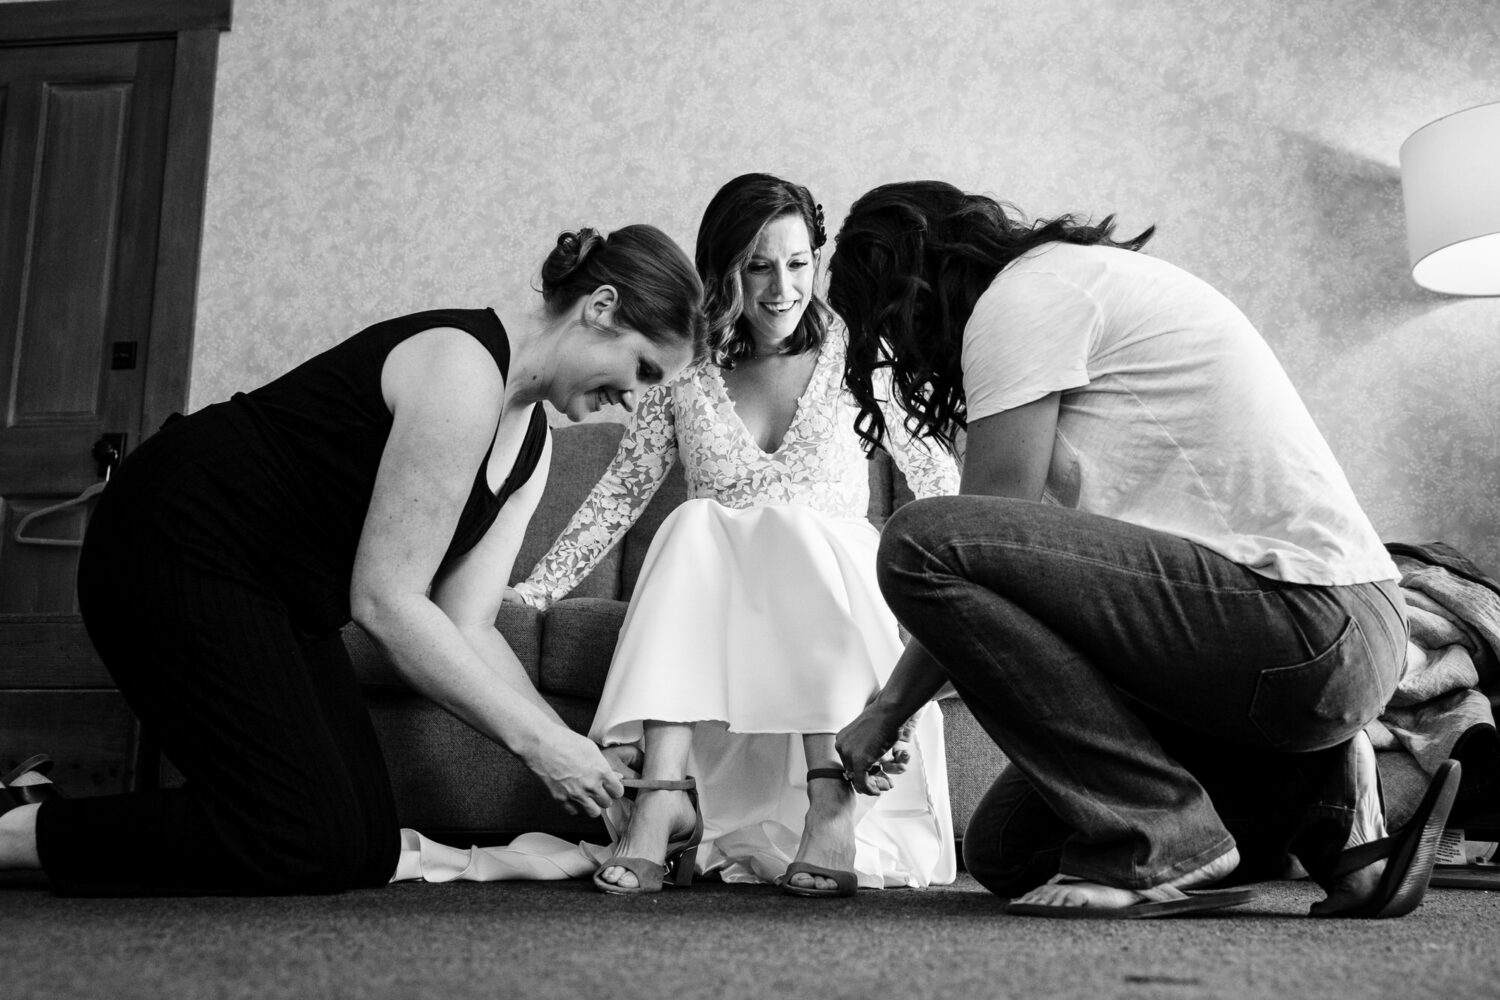 Two friends help a bride by fastening the straps on her wedding shoes.